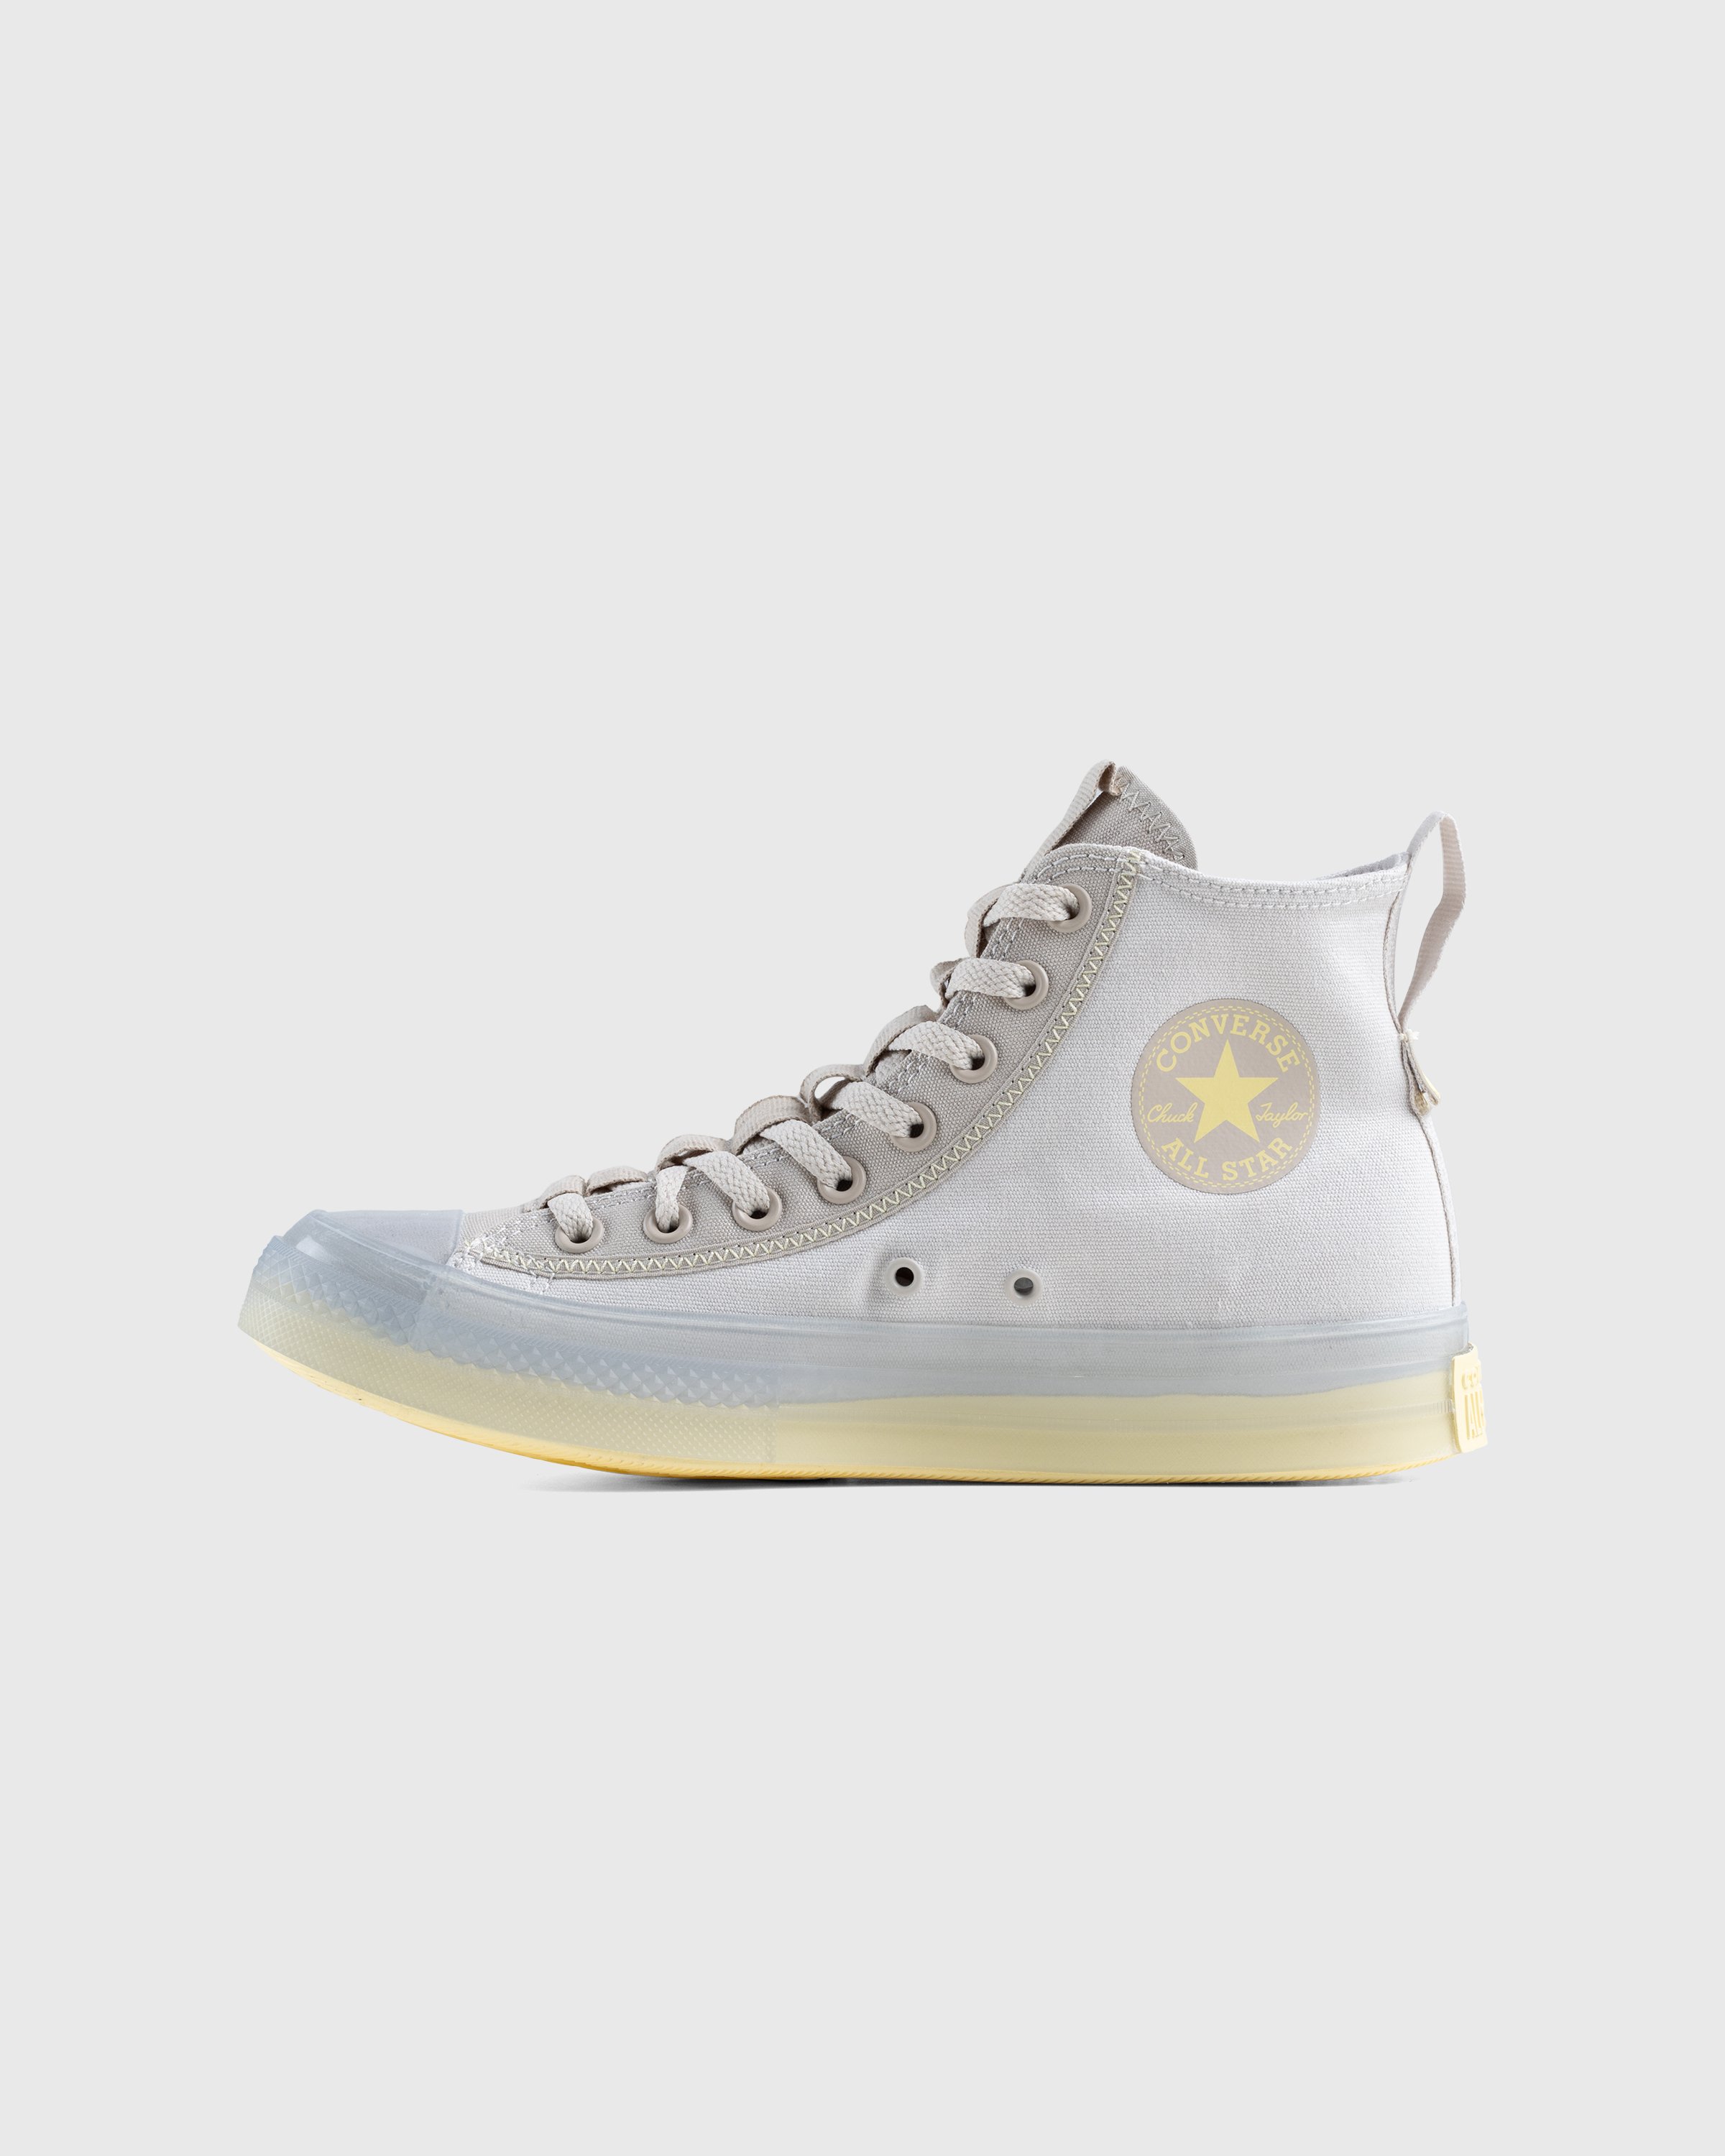 Converse - Chuck Taylor All Star CX Desert Sunset/Pale Putty/Papyrus - Footwear - Grey - Image 2